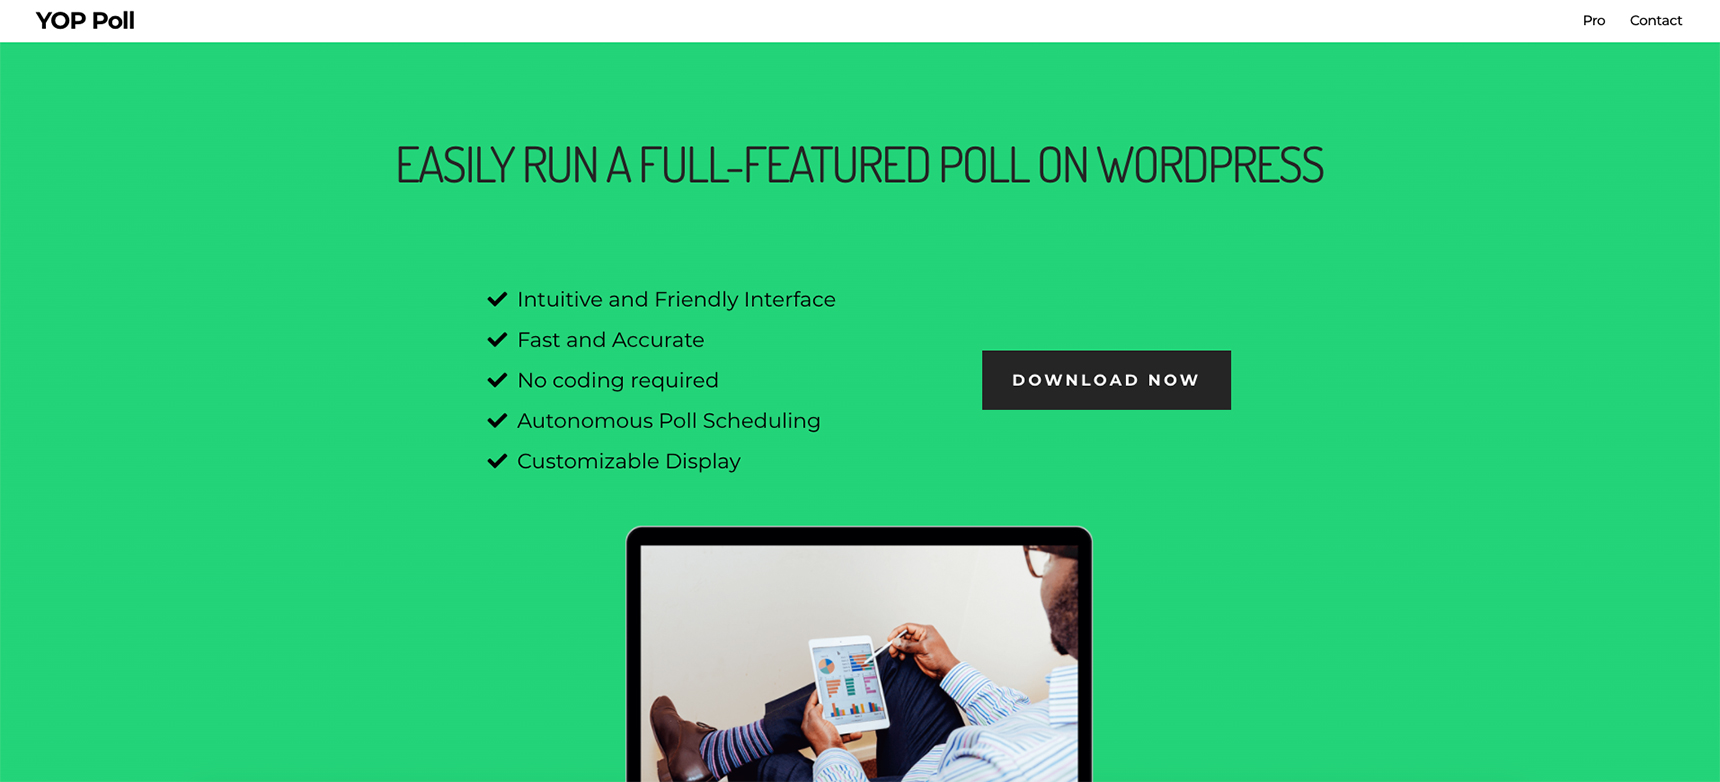 data collection and survey plugins yop poll